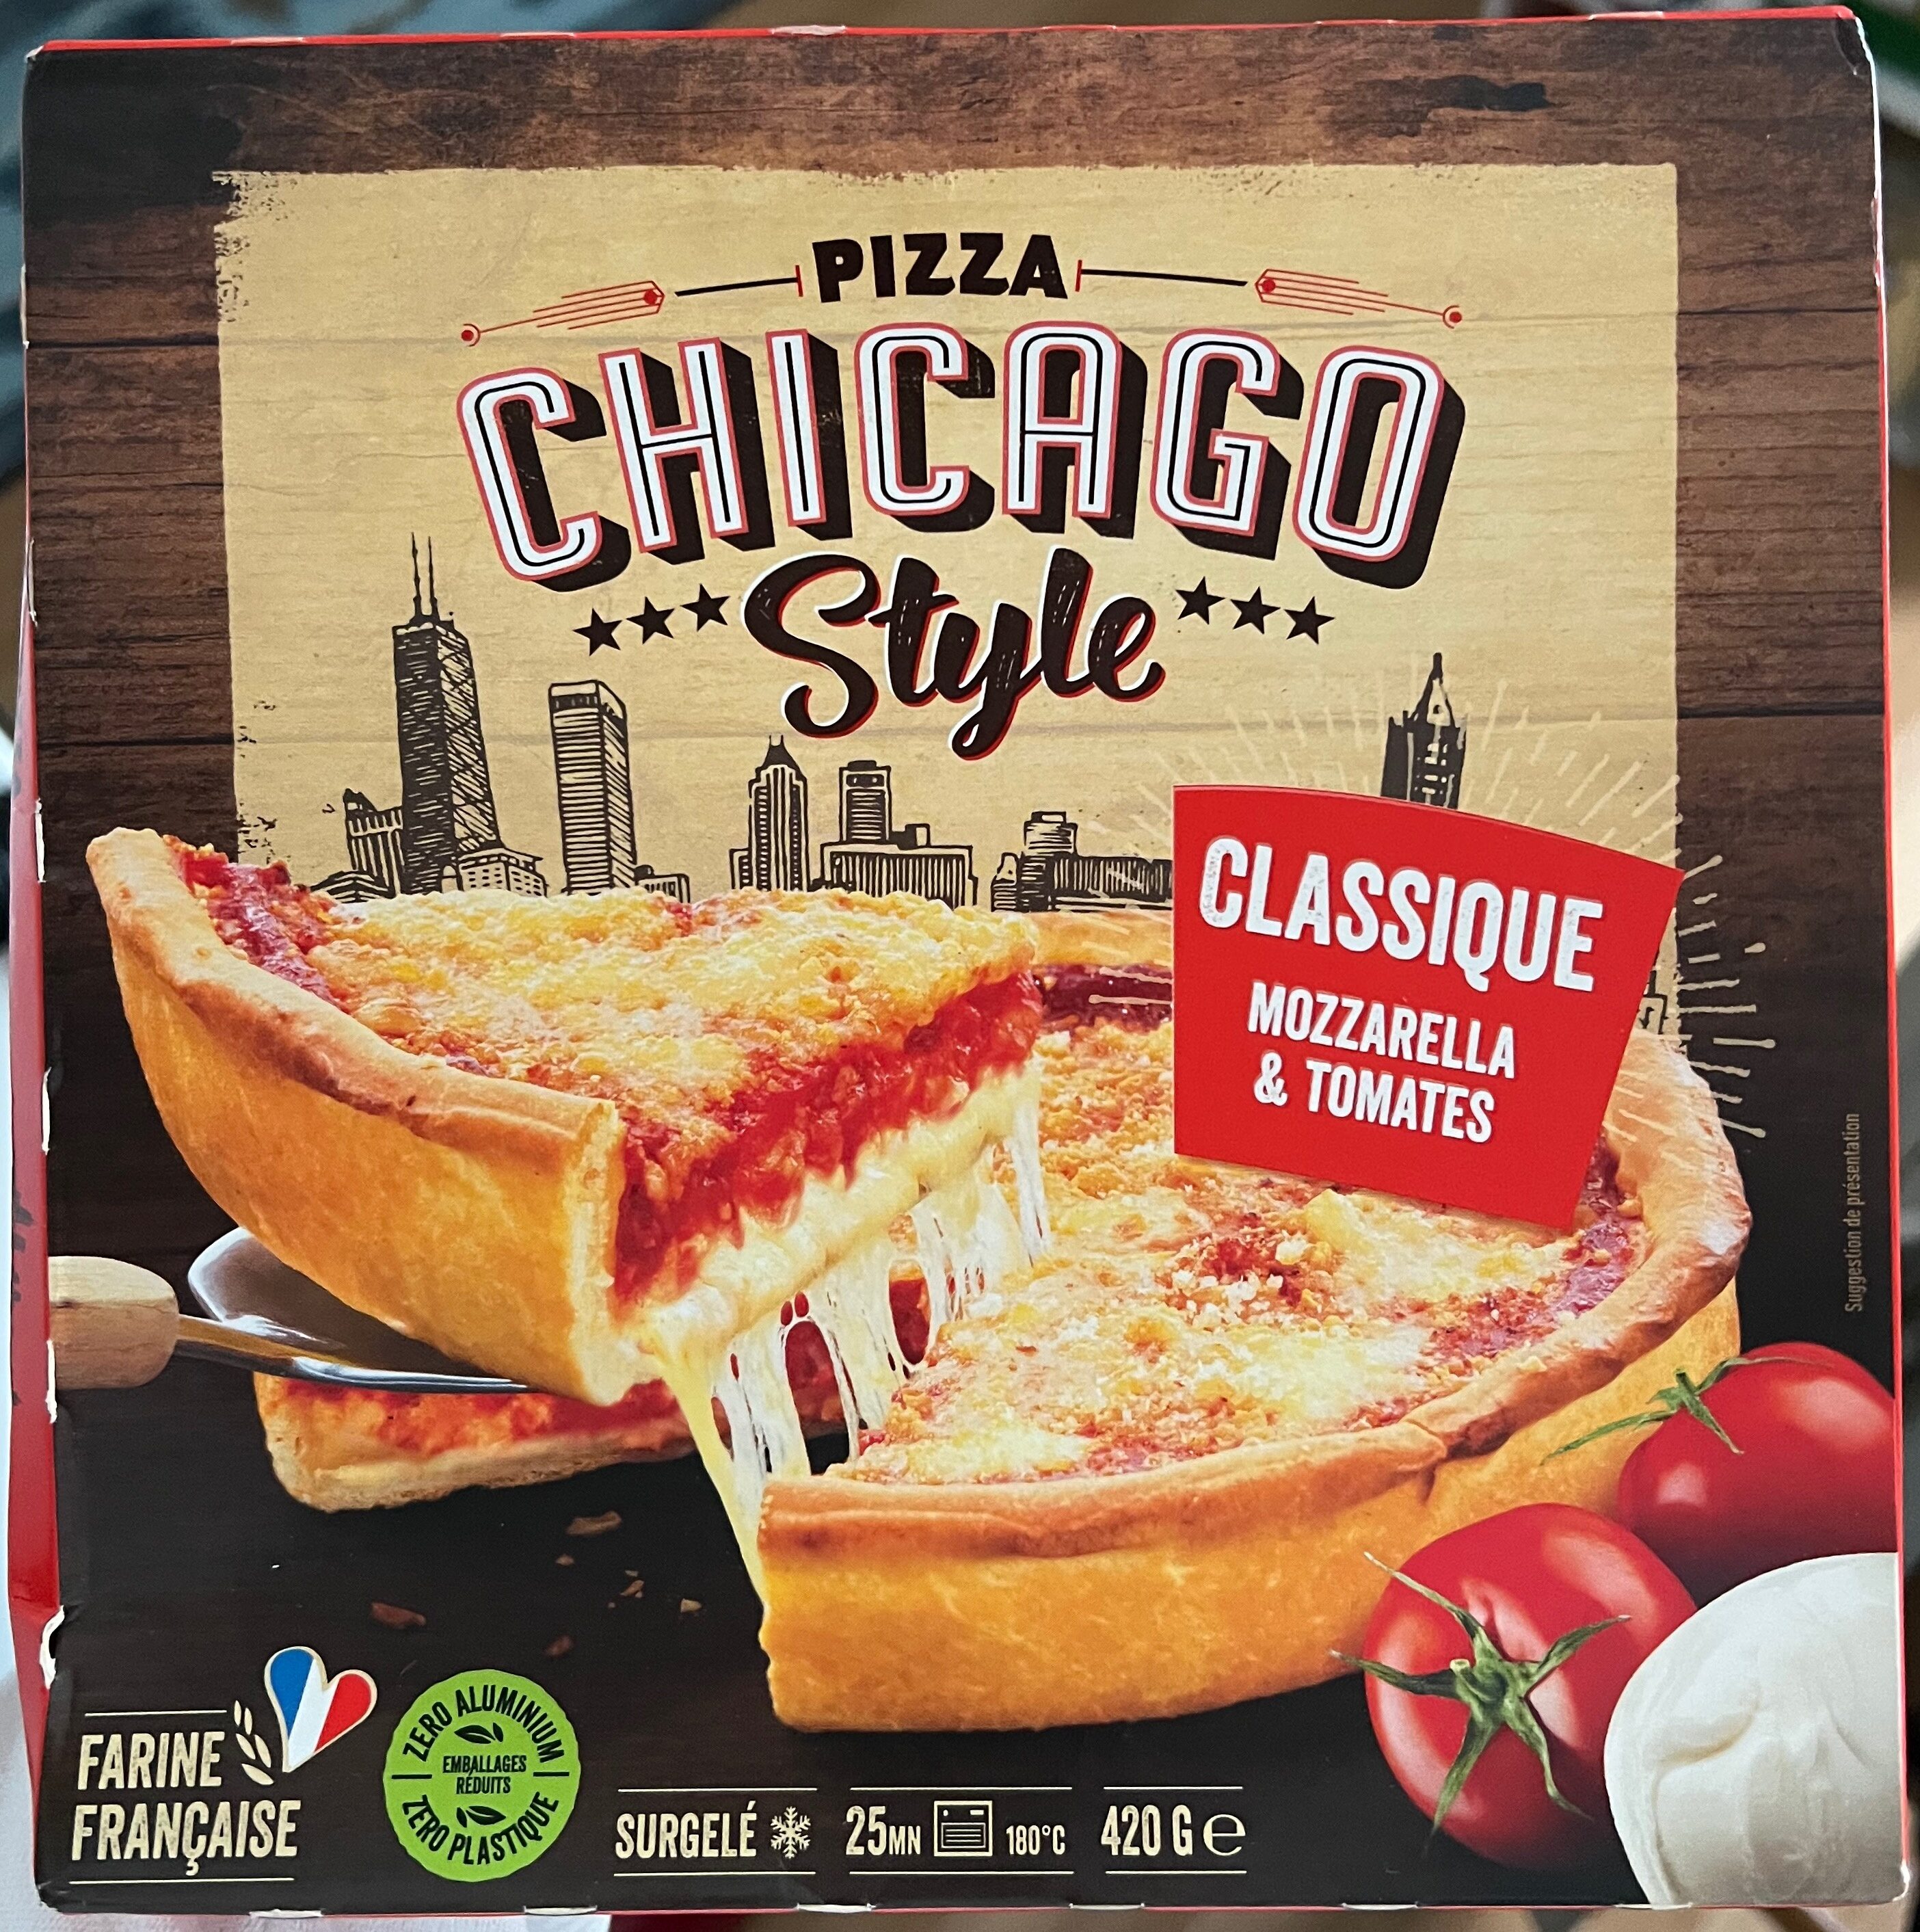 Pizza chicago style classique - Product - fr